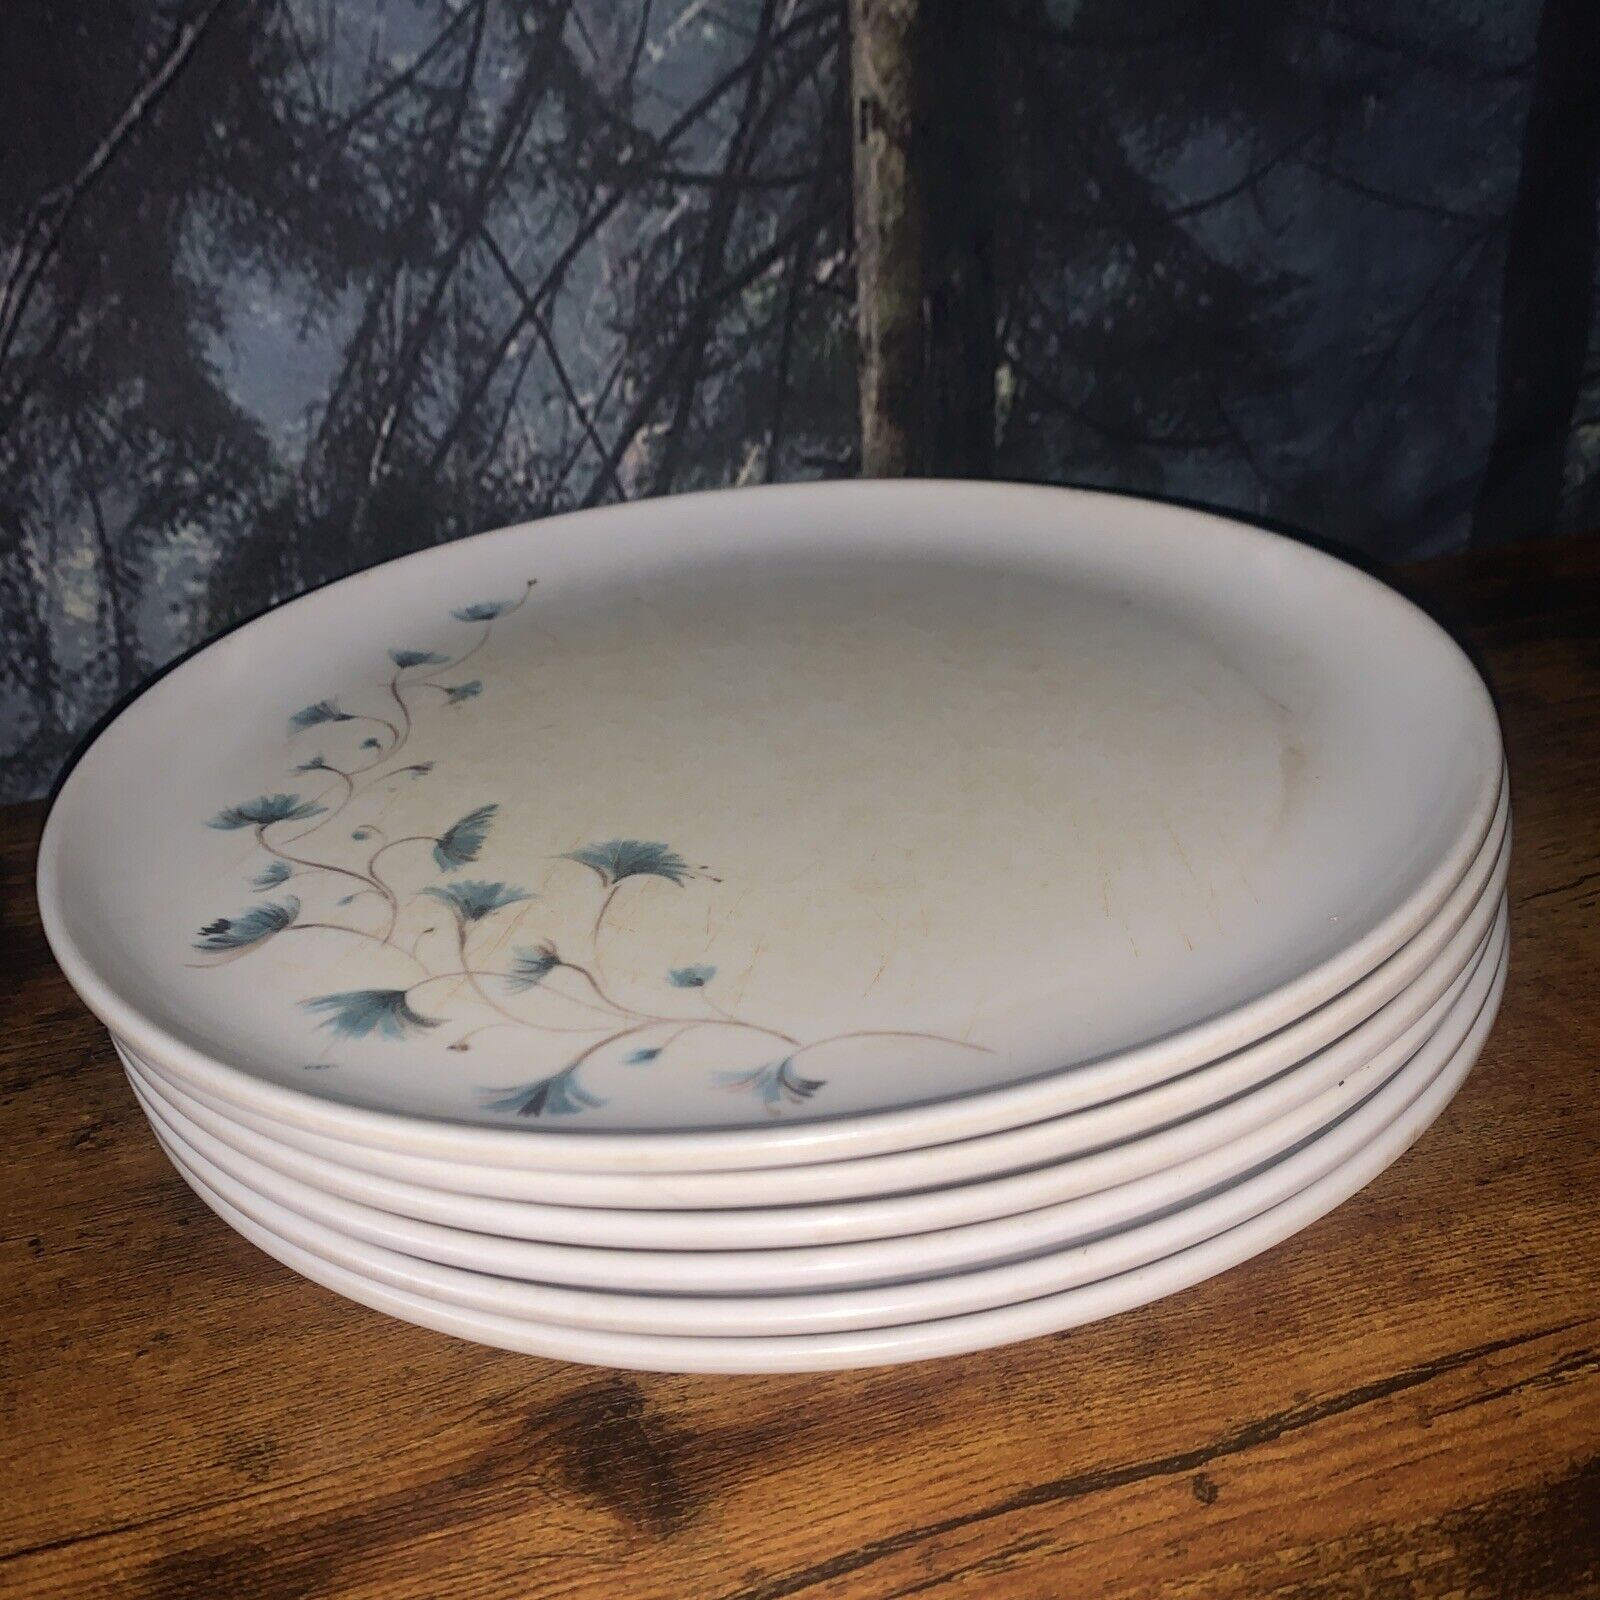 Vintage Kenro Melmac Plates White with Blue Flowers Set of 6-9 ¾” Across